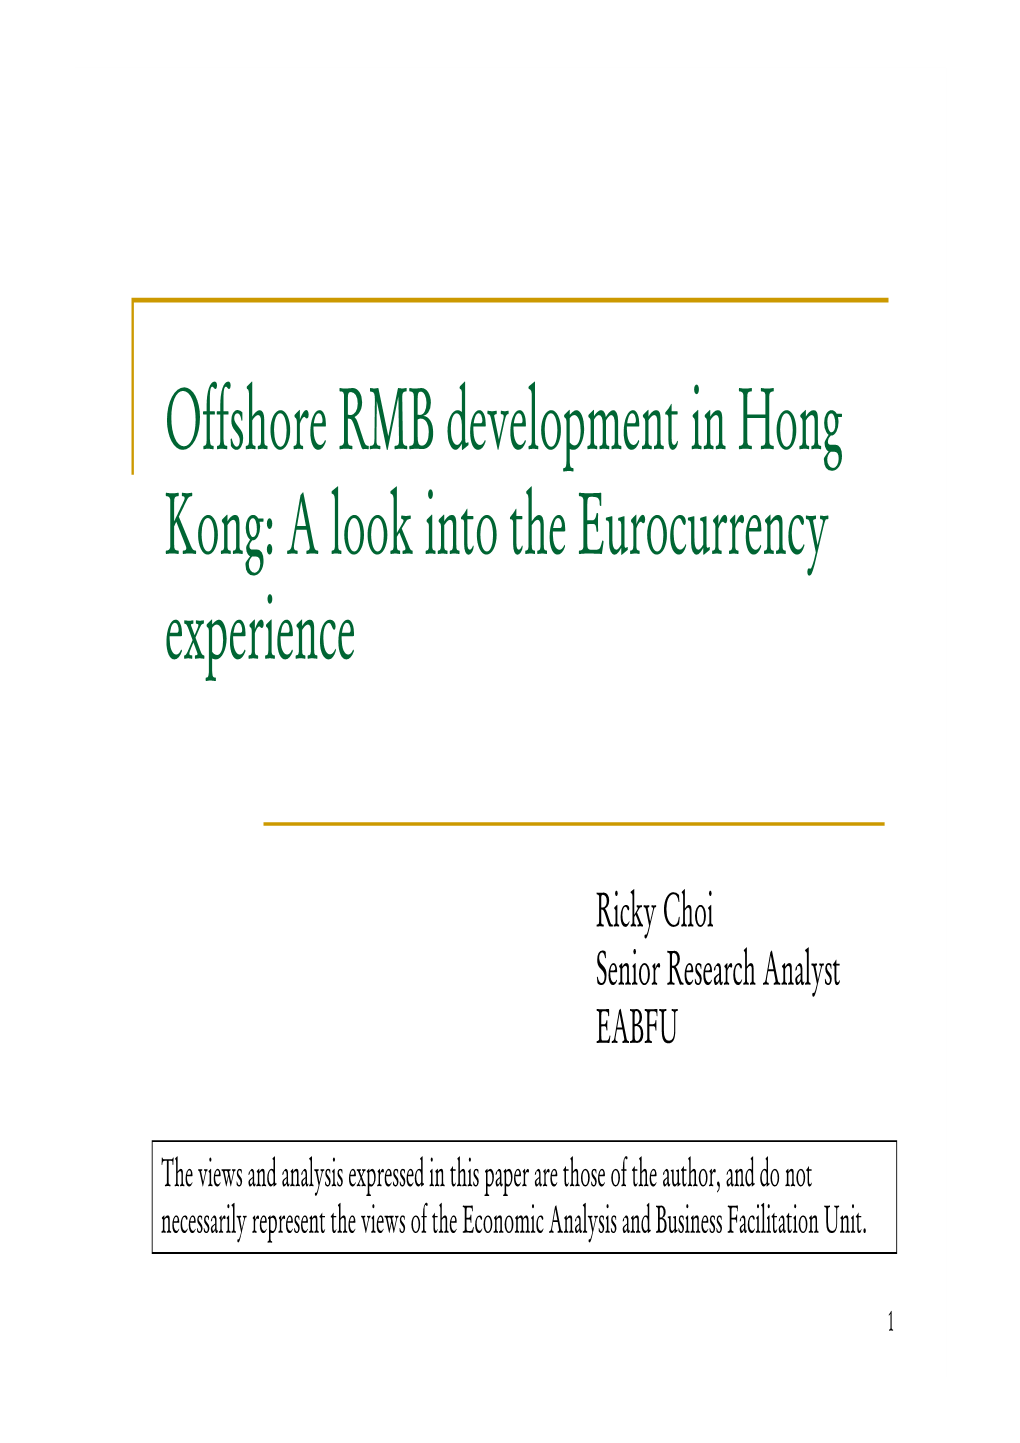 Offshore RMB Development in Hong Kong: a Look Into the Eurocurrency Experience